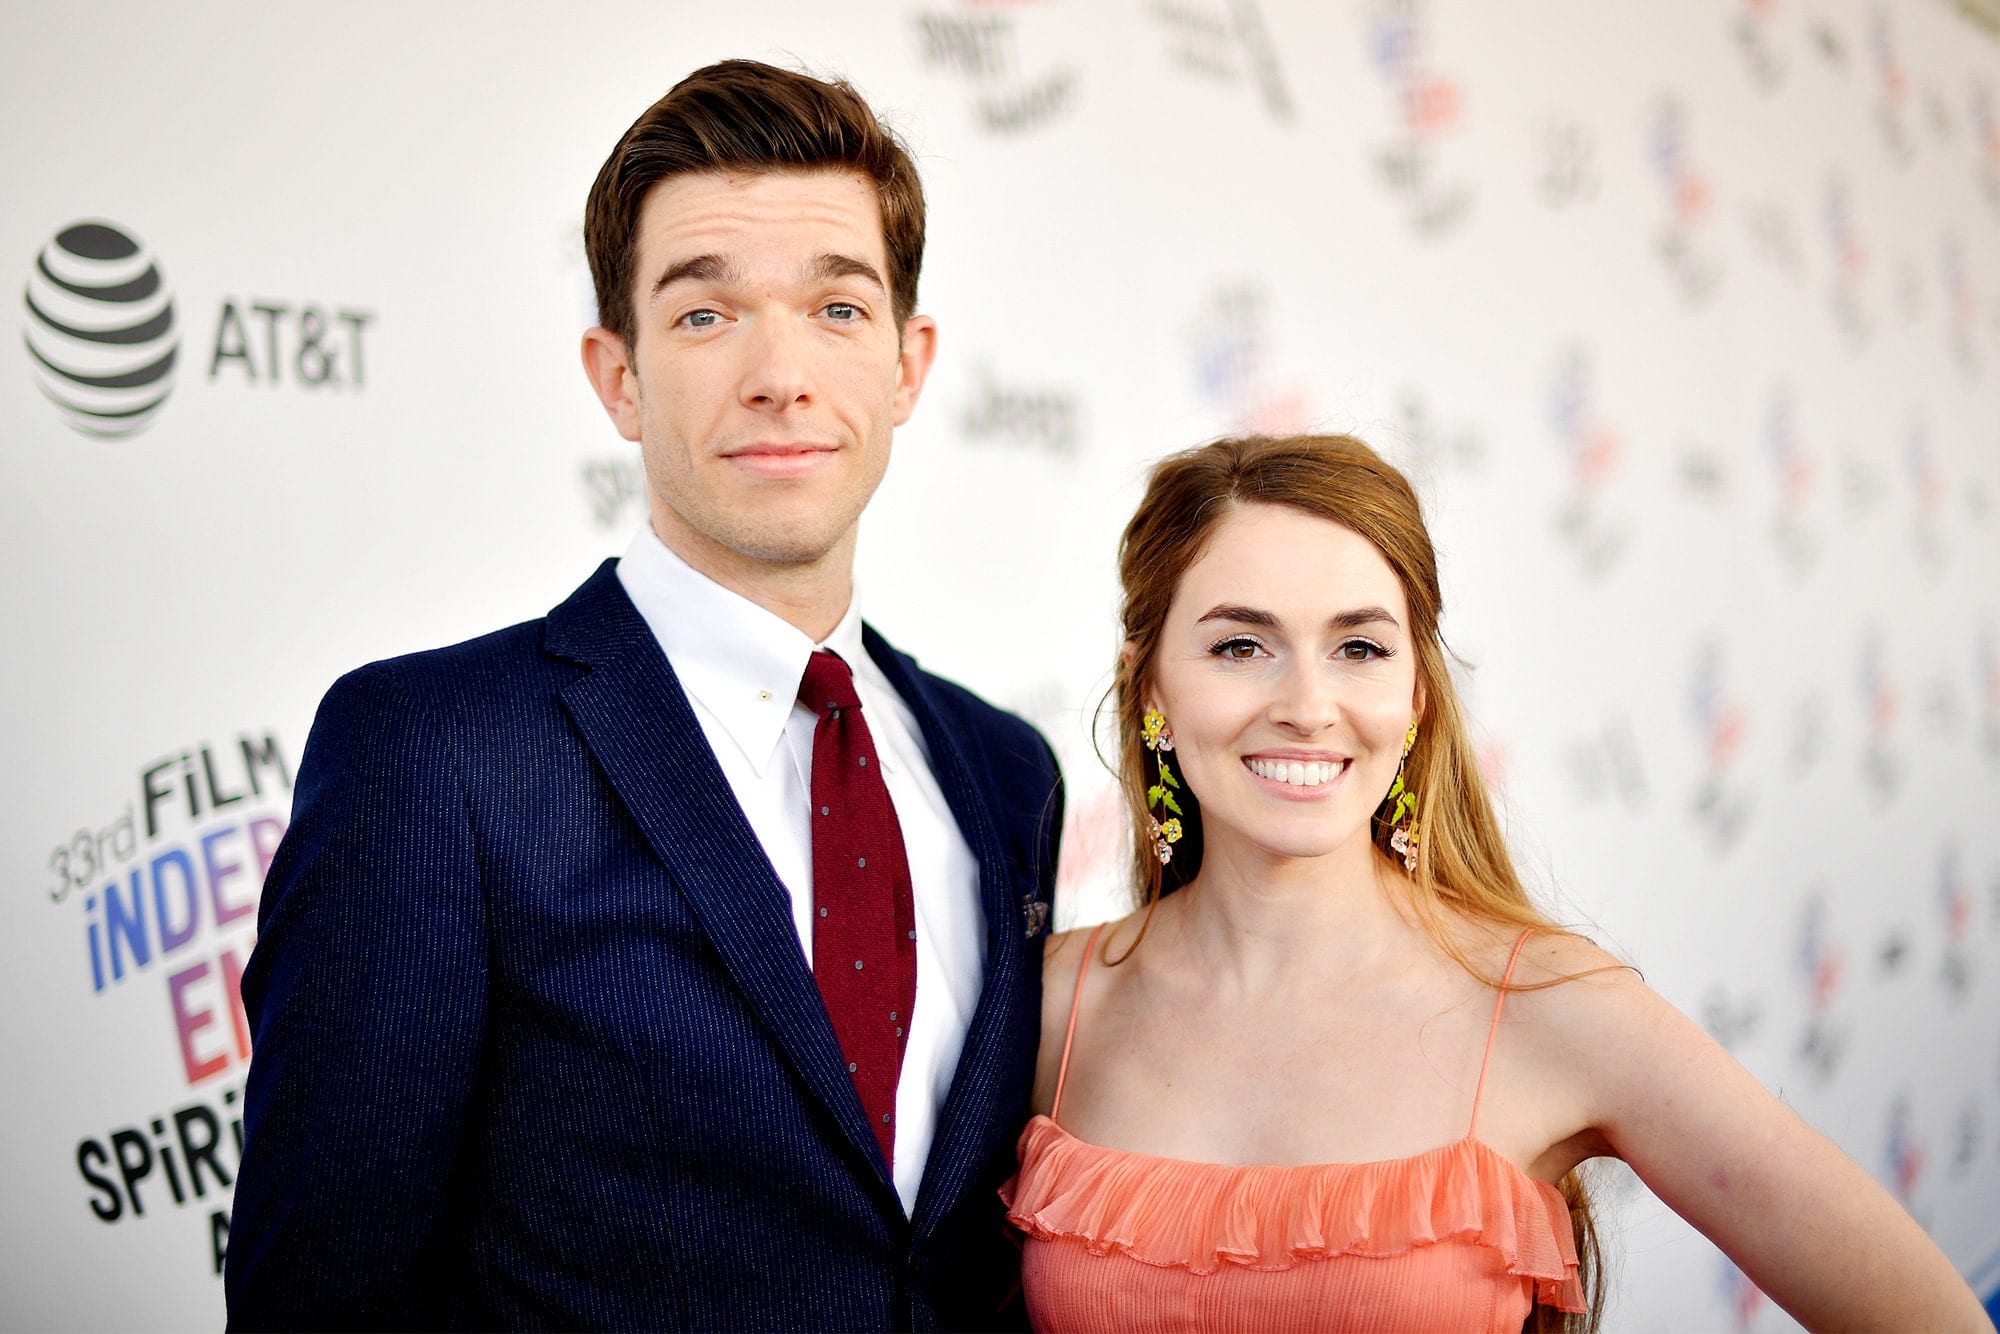 Why is John Mulaney getting divorce?